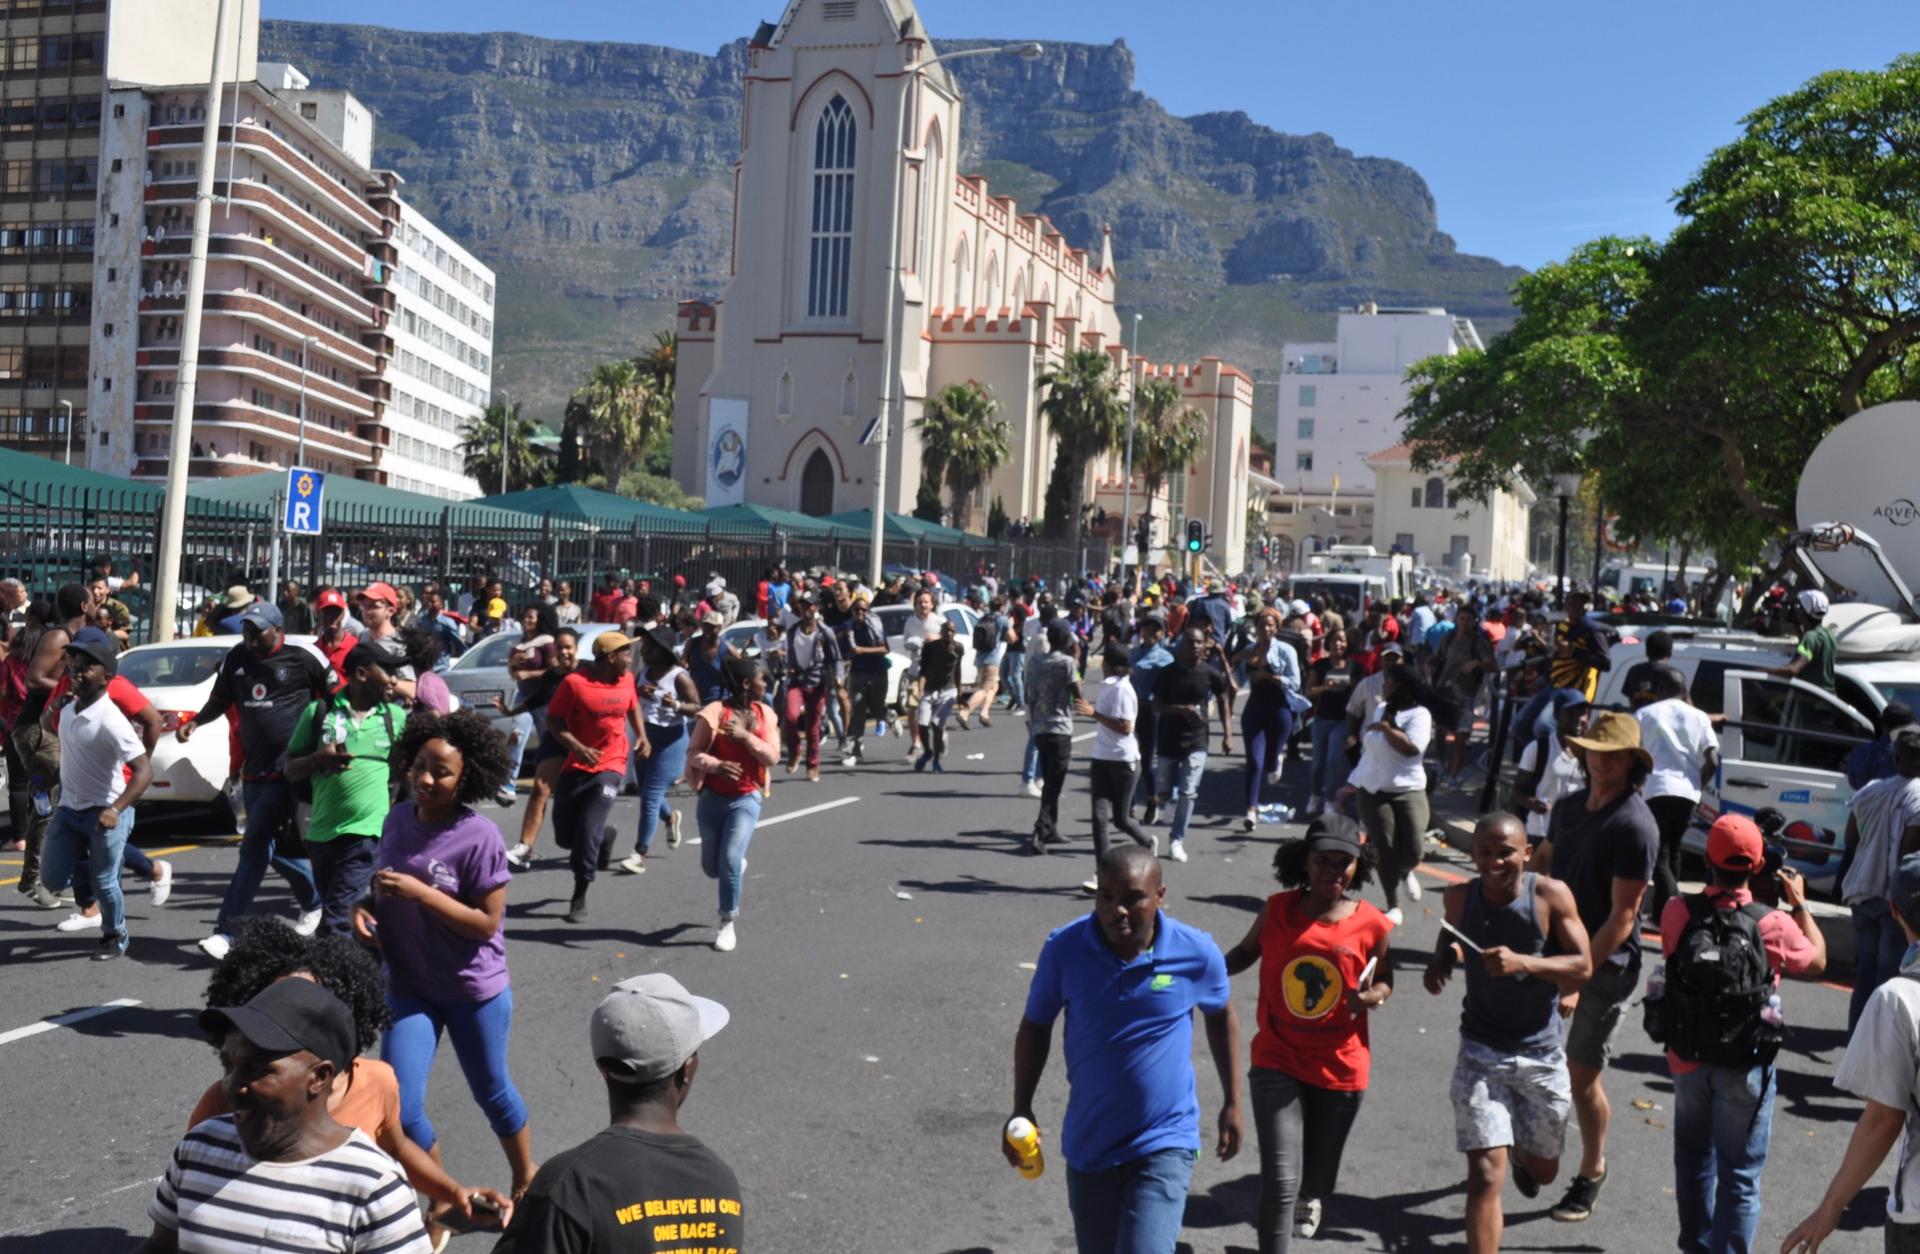 The scene at a student protest in Cape Town last month